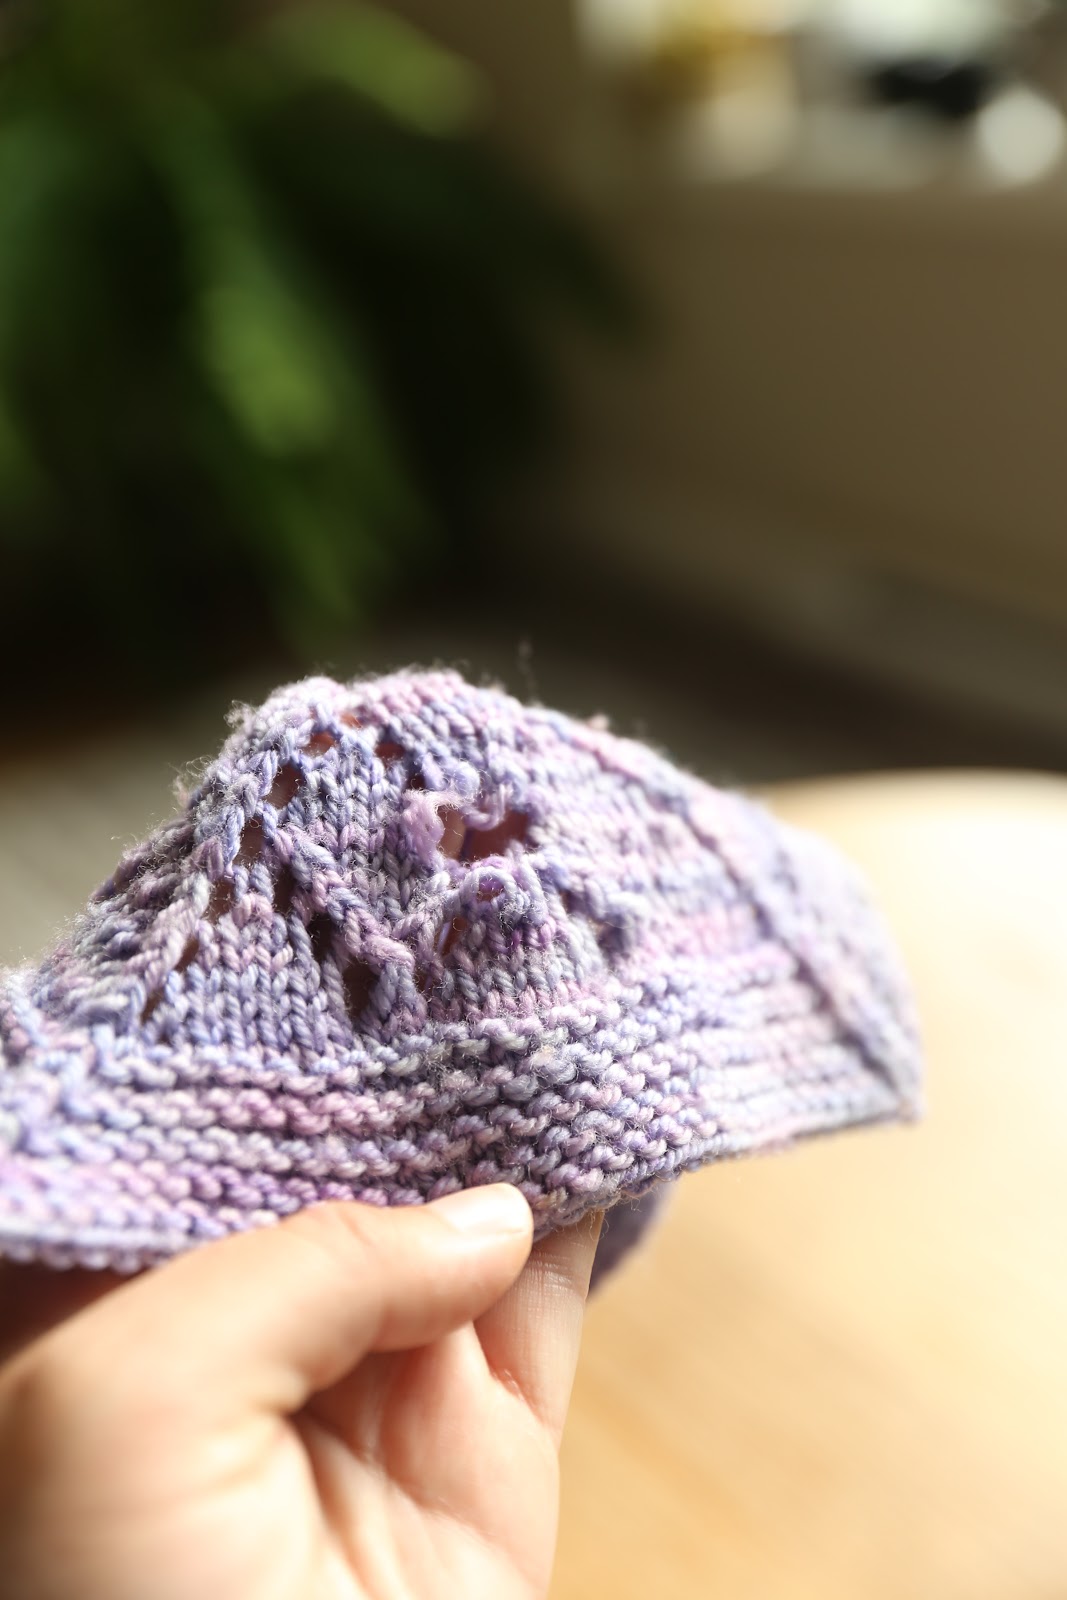 I am holding a lavender lace balnket square with a big hole in it.